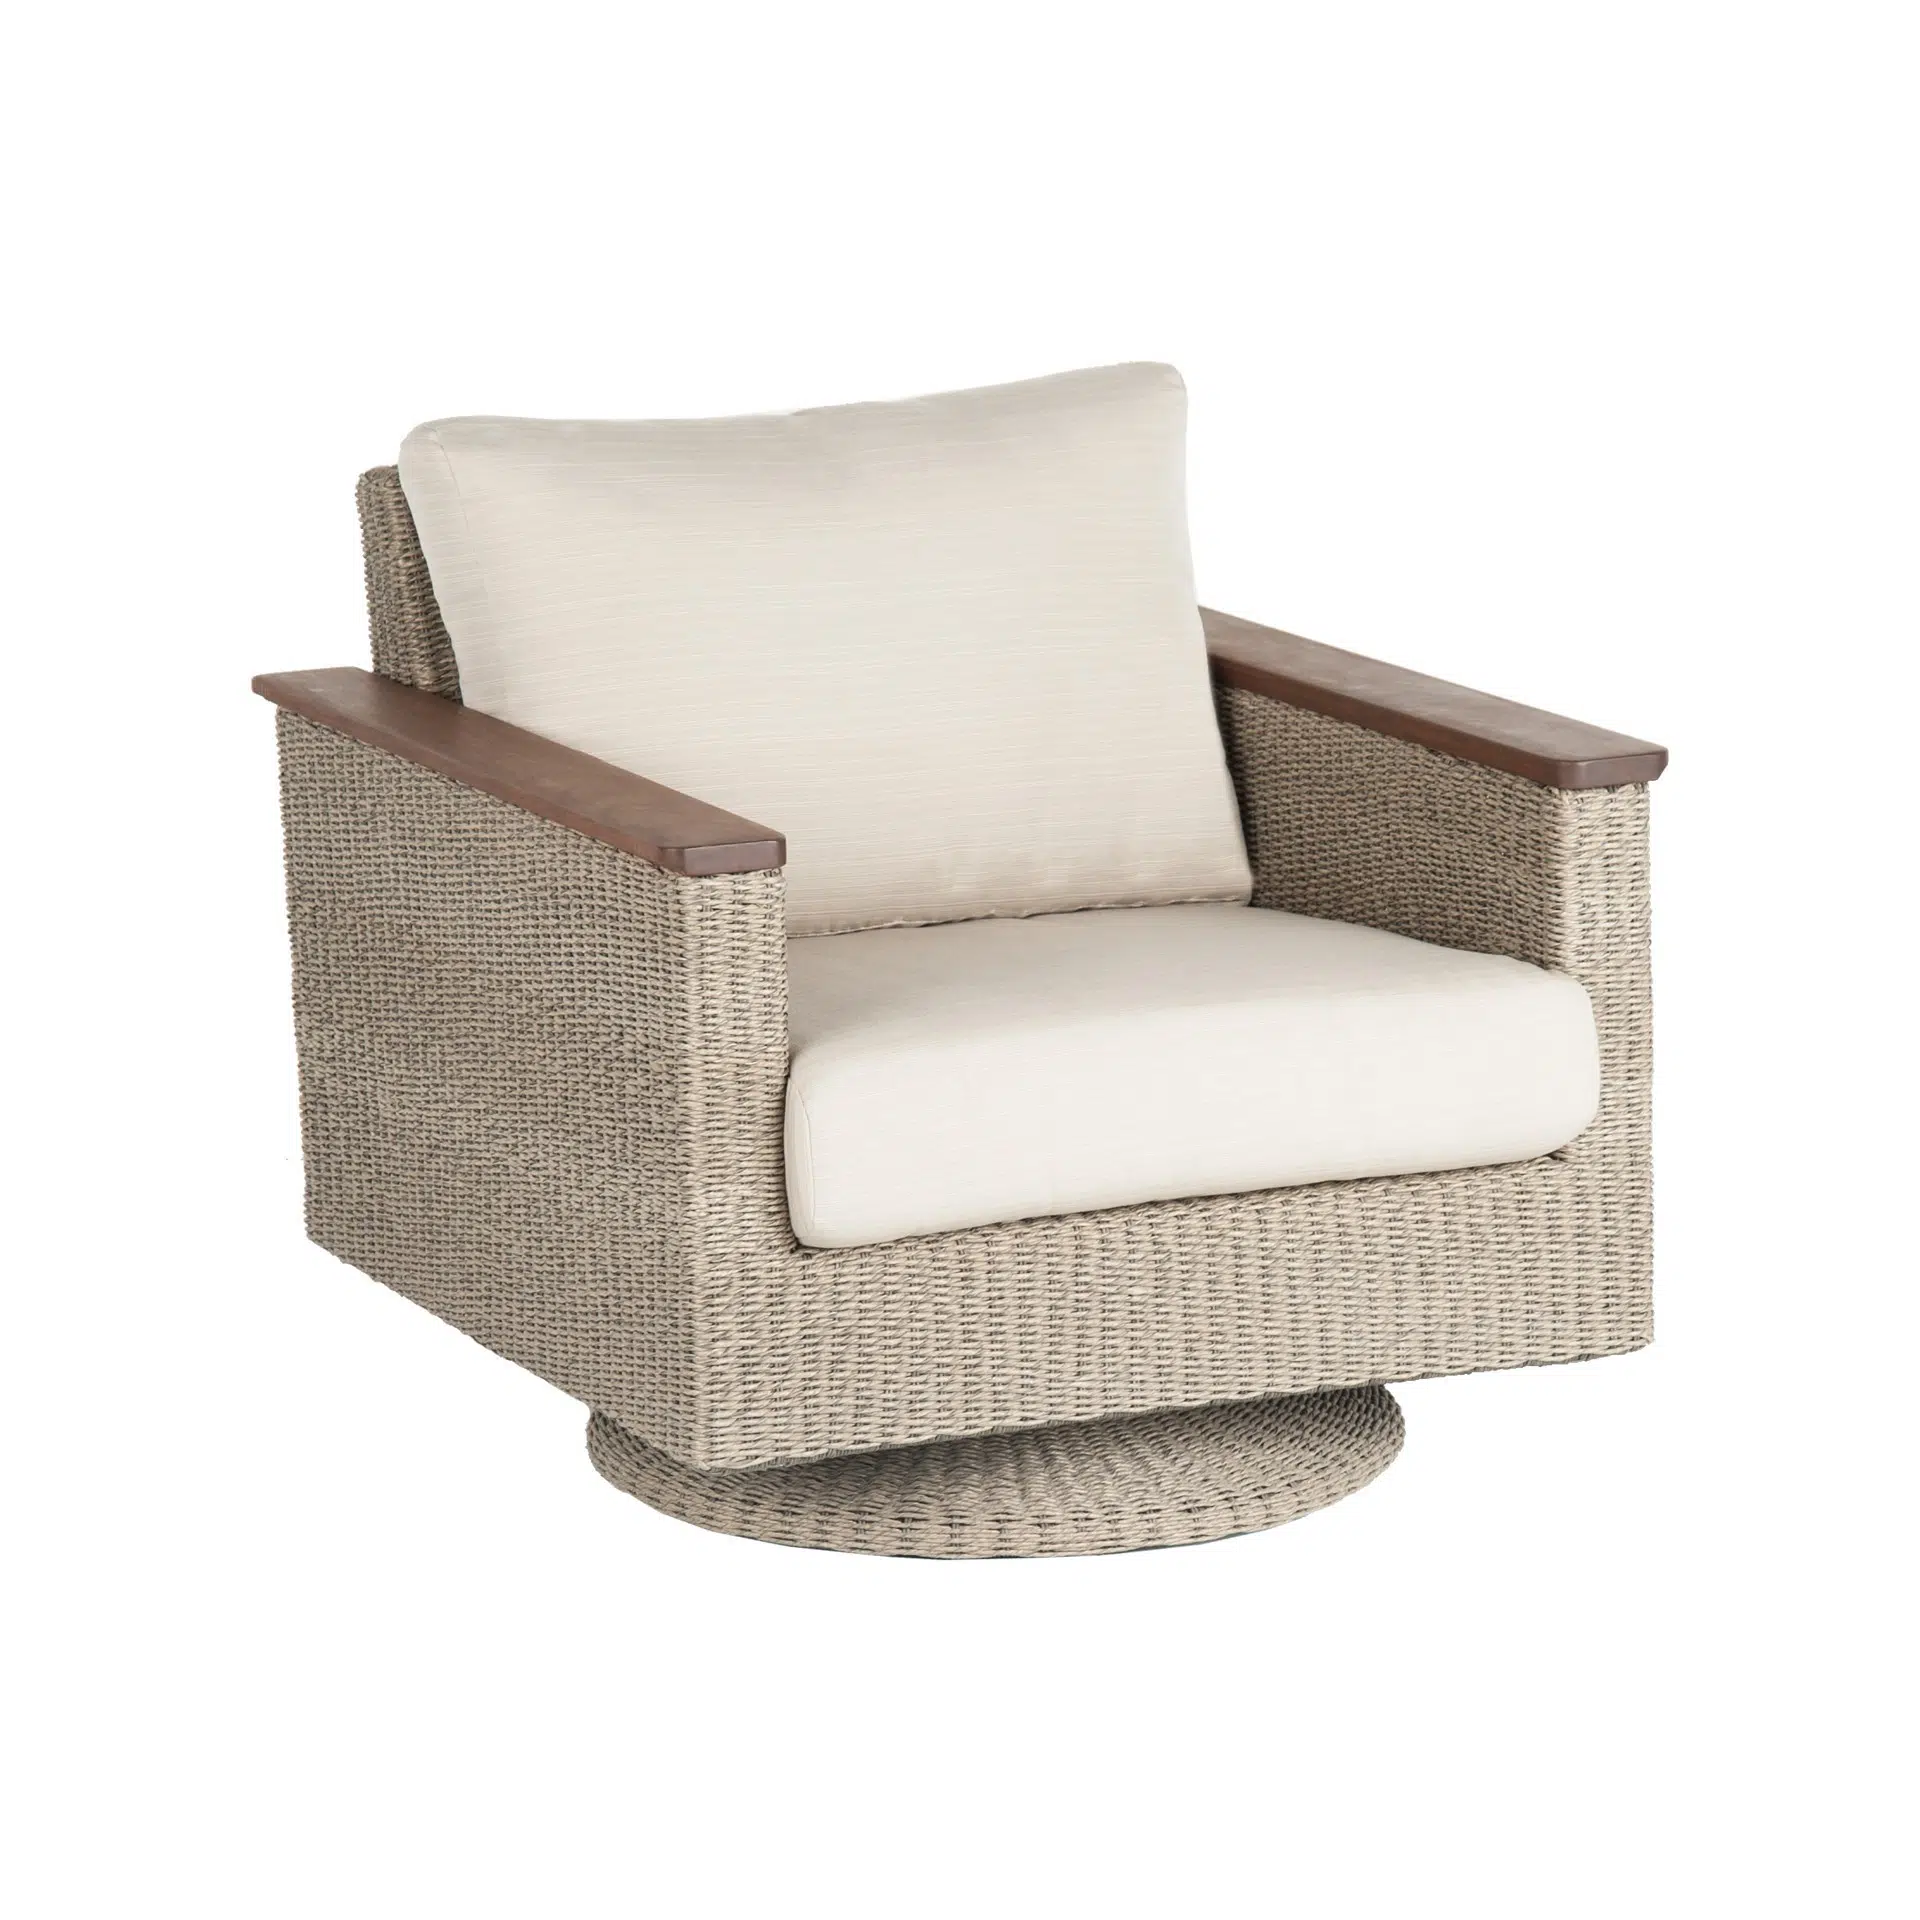 Coral swivel rocker natural from Hauser's Patio in San Diego, CA